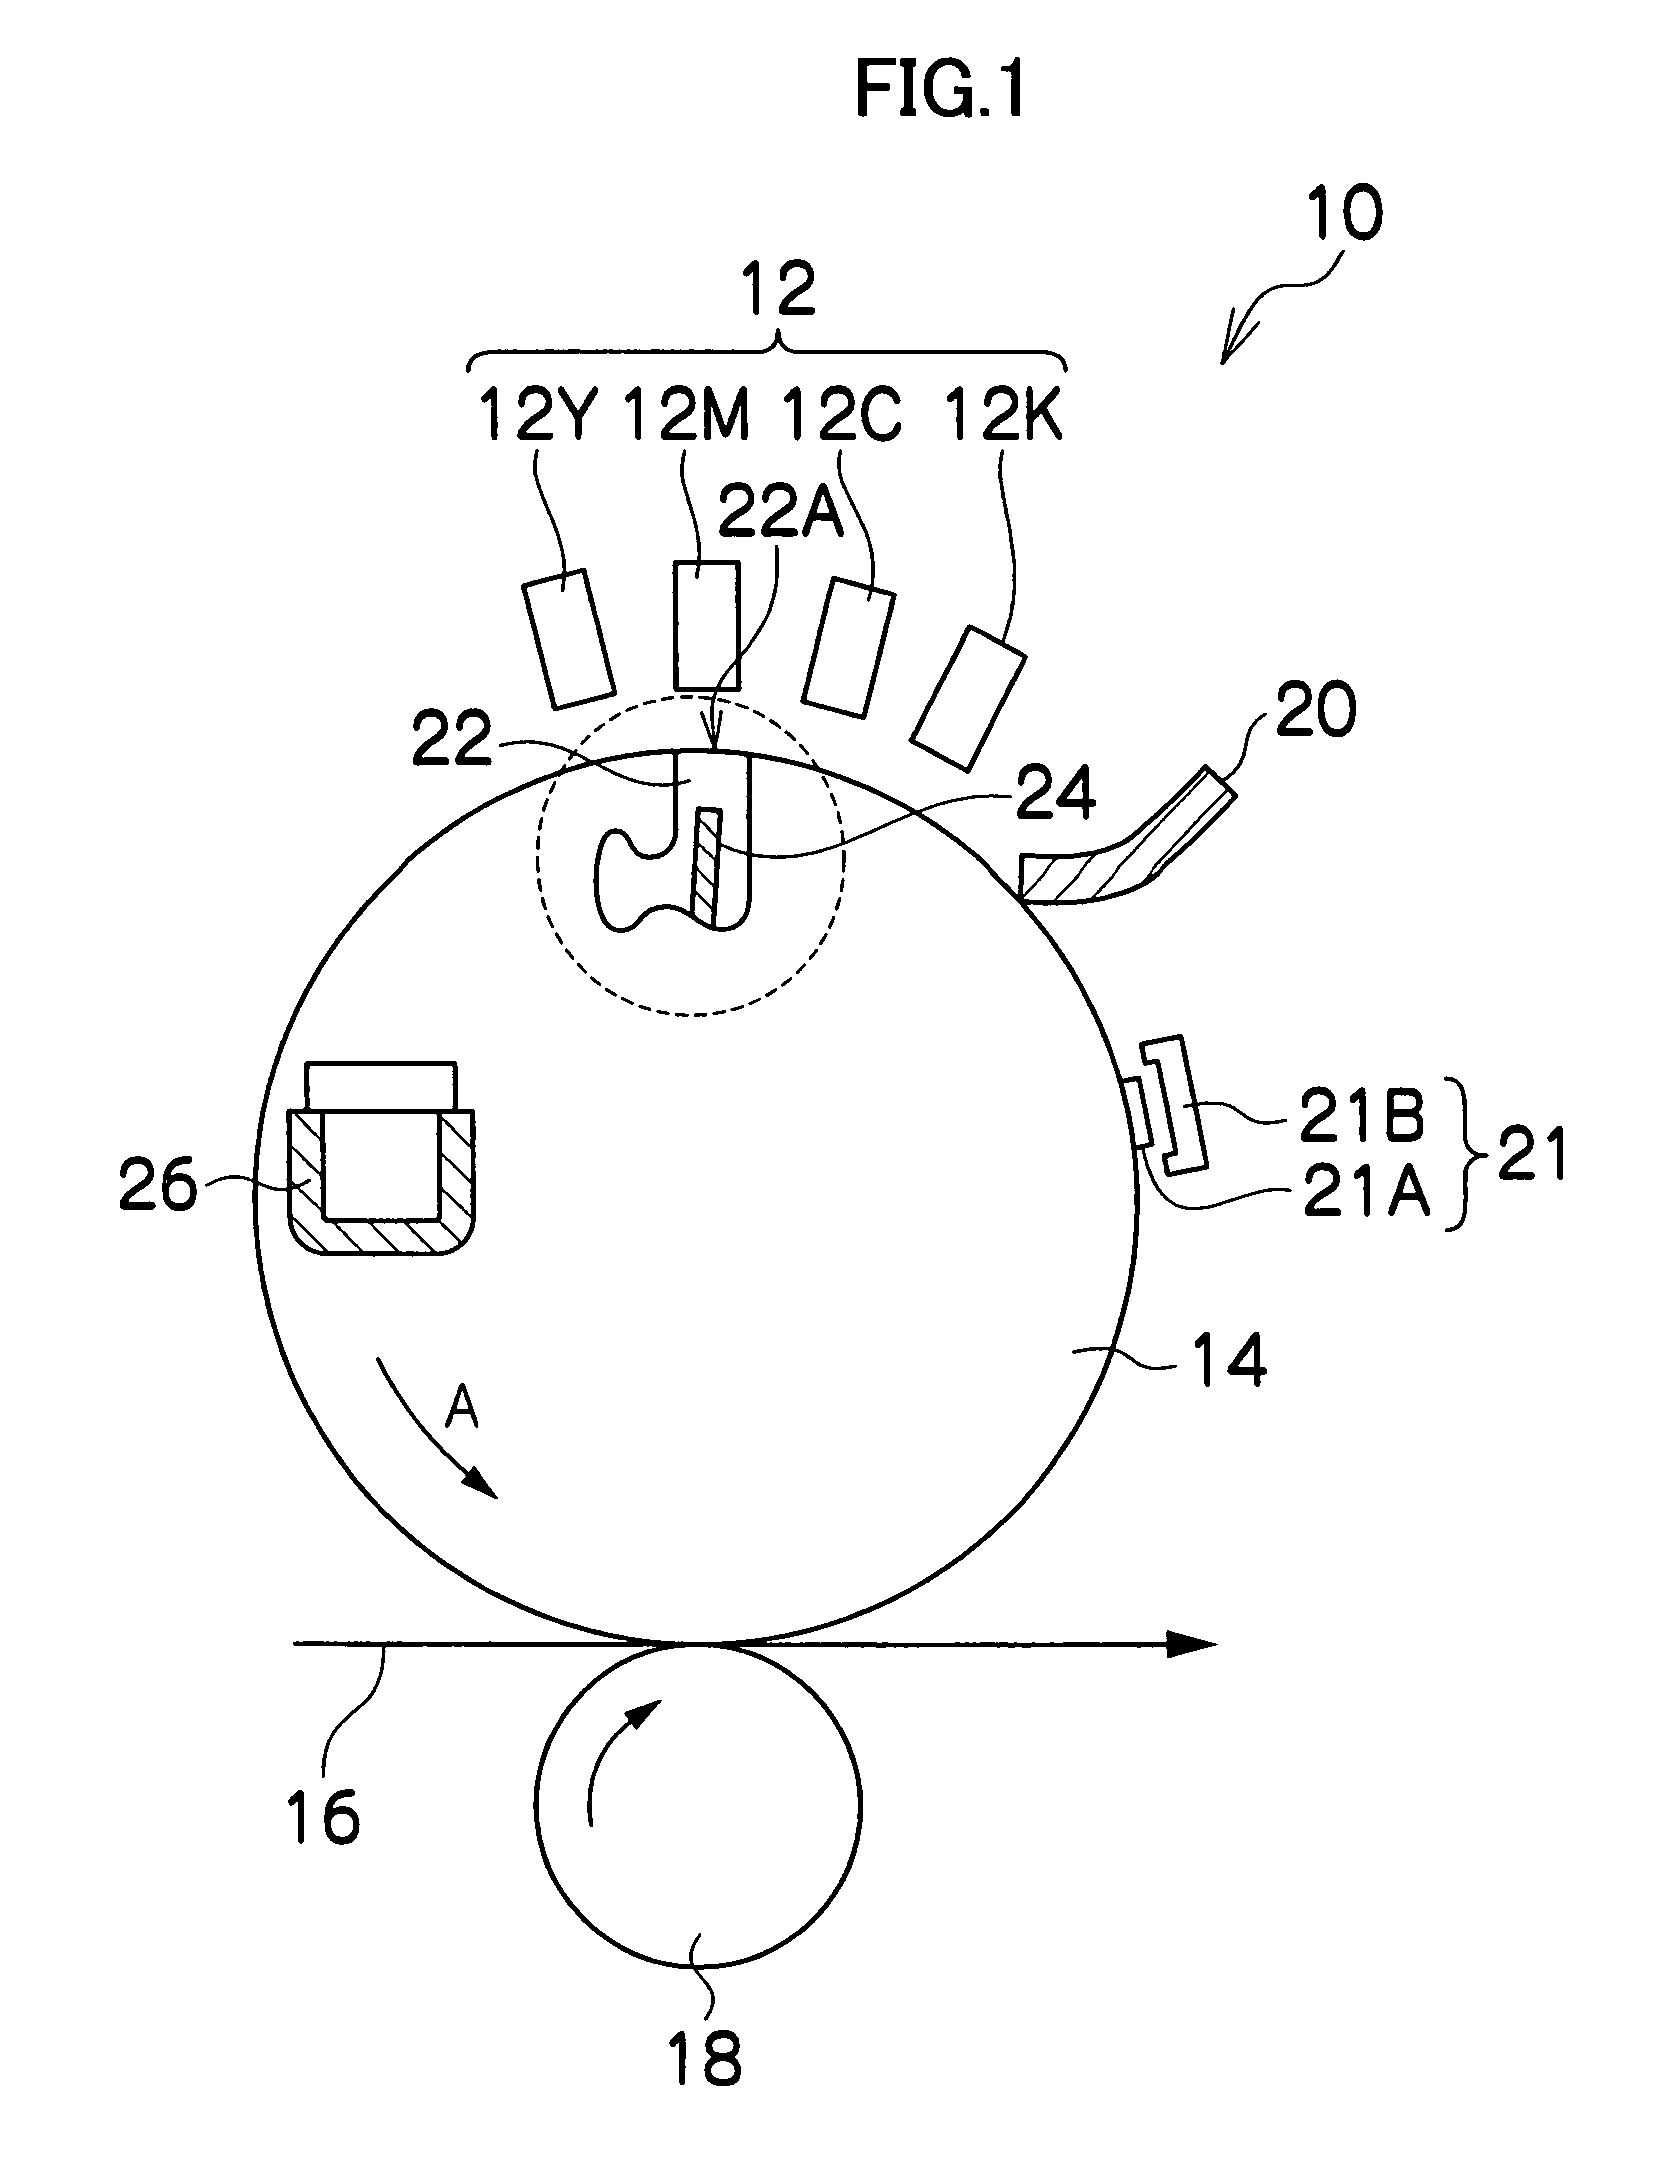 Inkjet recording apparatus and cleaning method